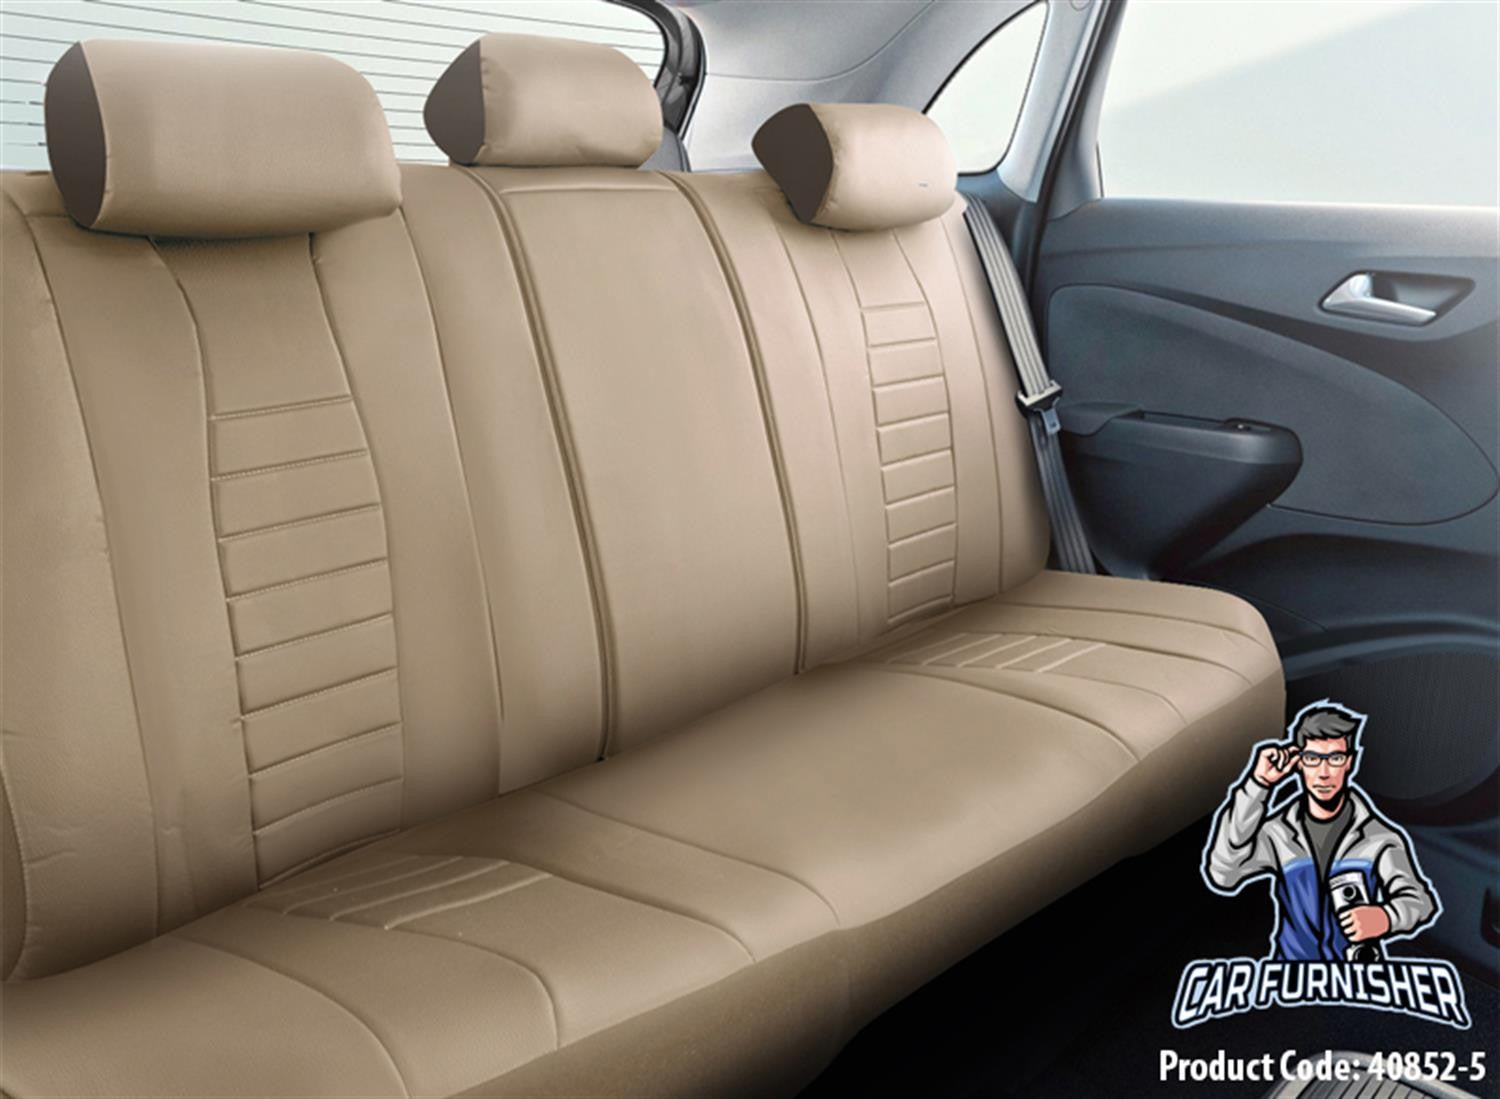 Luxury Car Seat Cover Set (5 Colors) | Tokyo Series Beige Full Leather